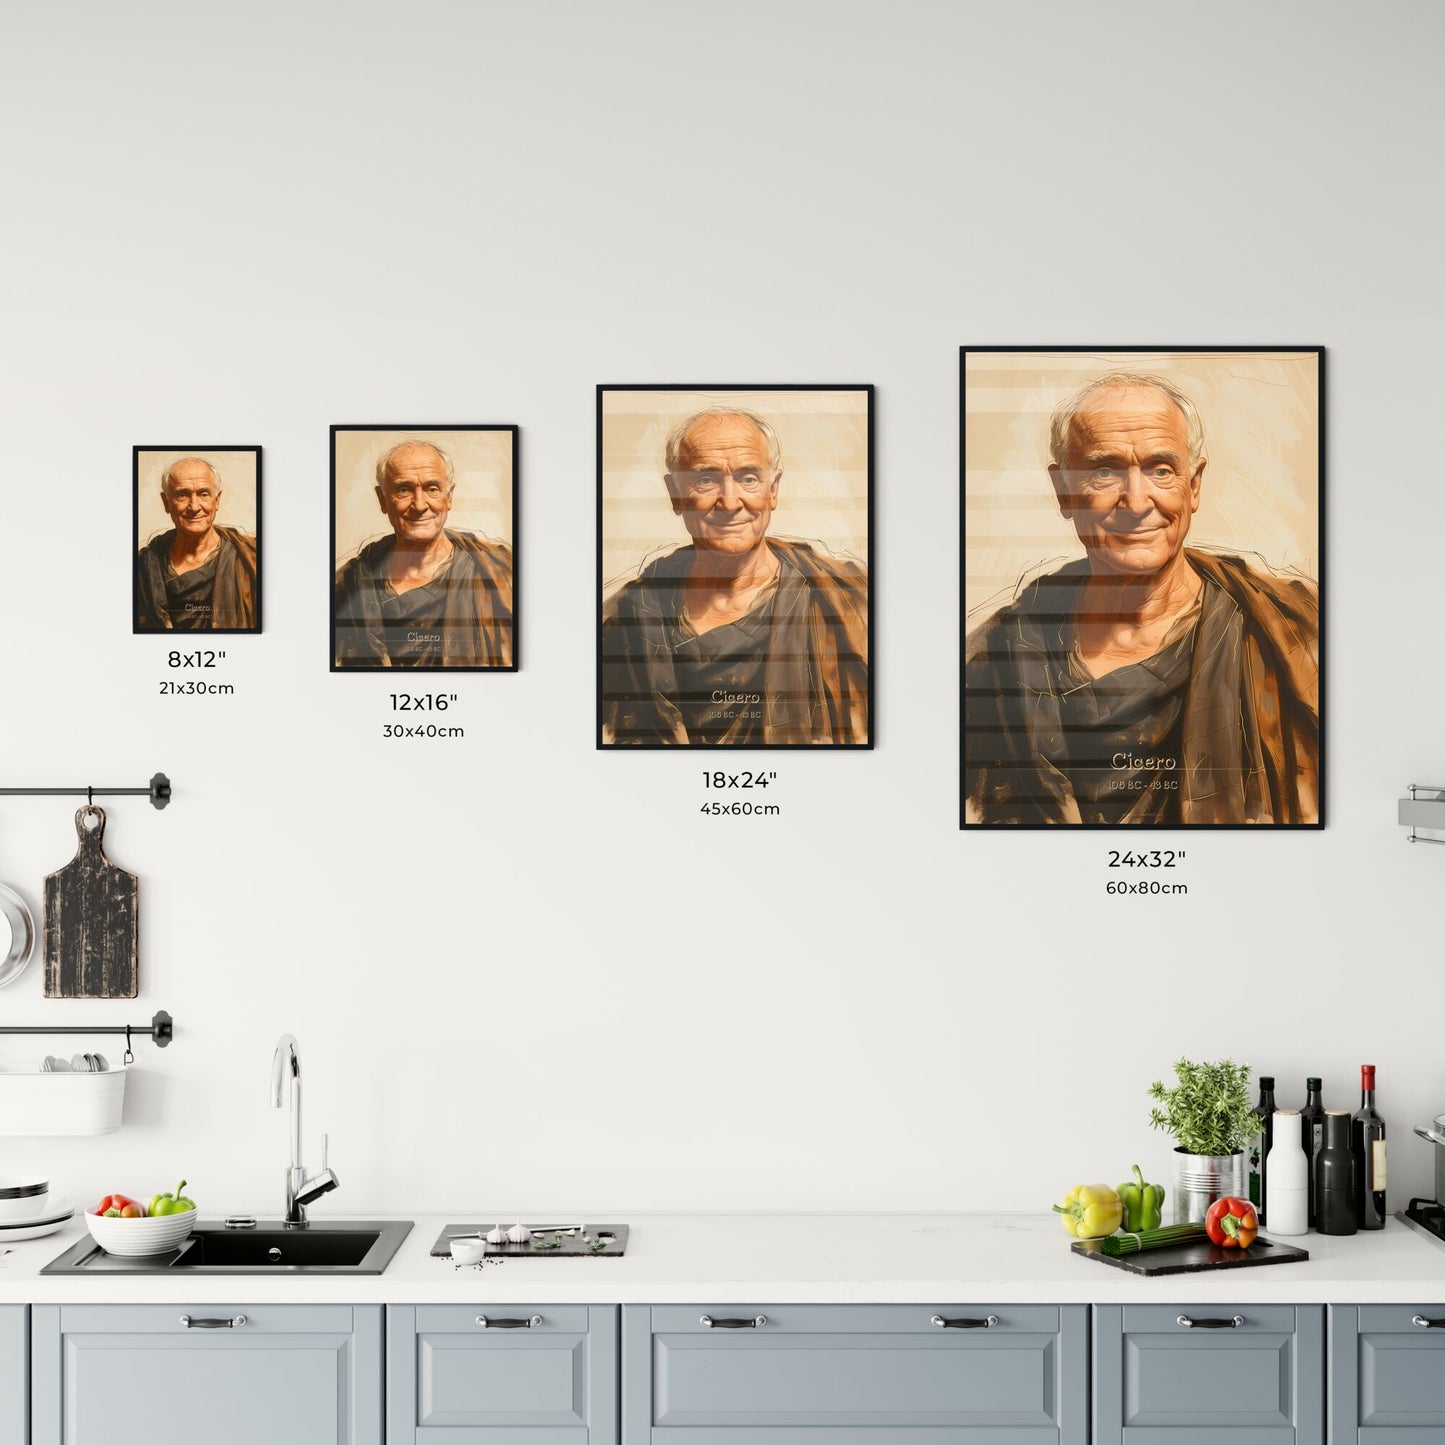 Cicero, 106 BC - 43 BC, A Poster of a man smiling for the camera Default Title